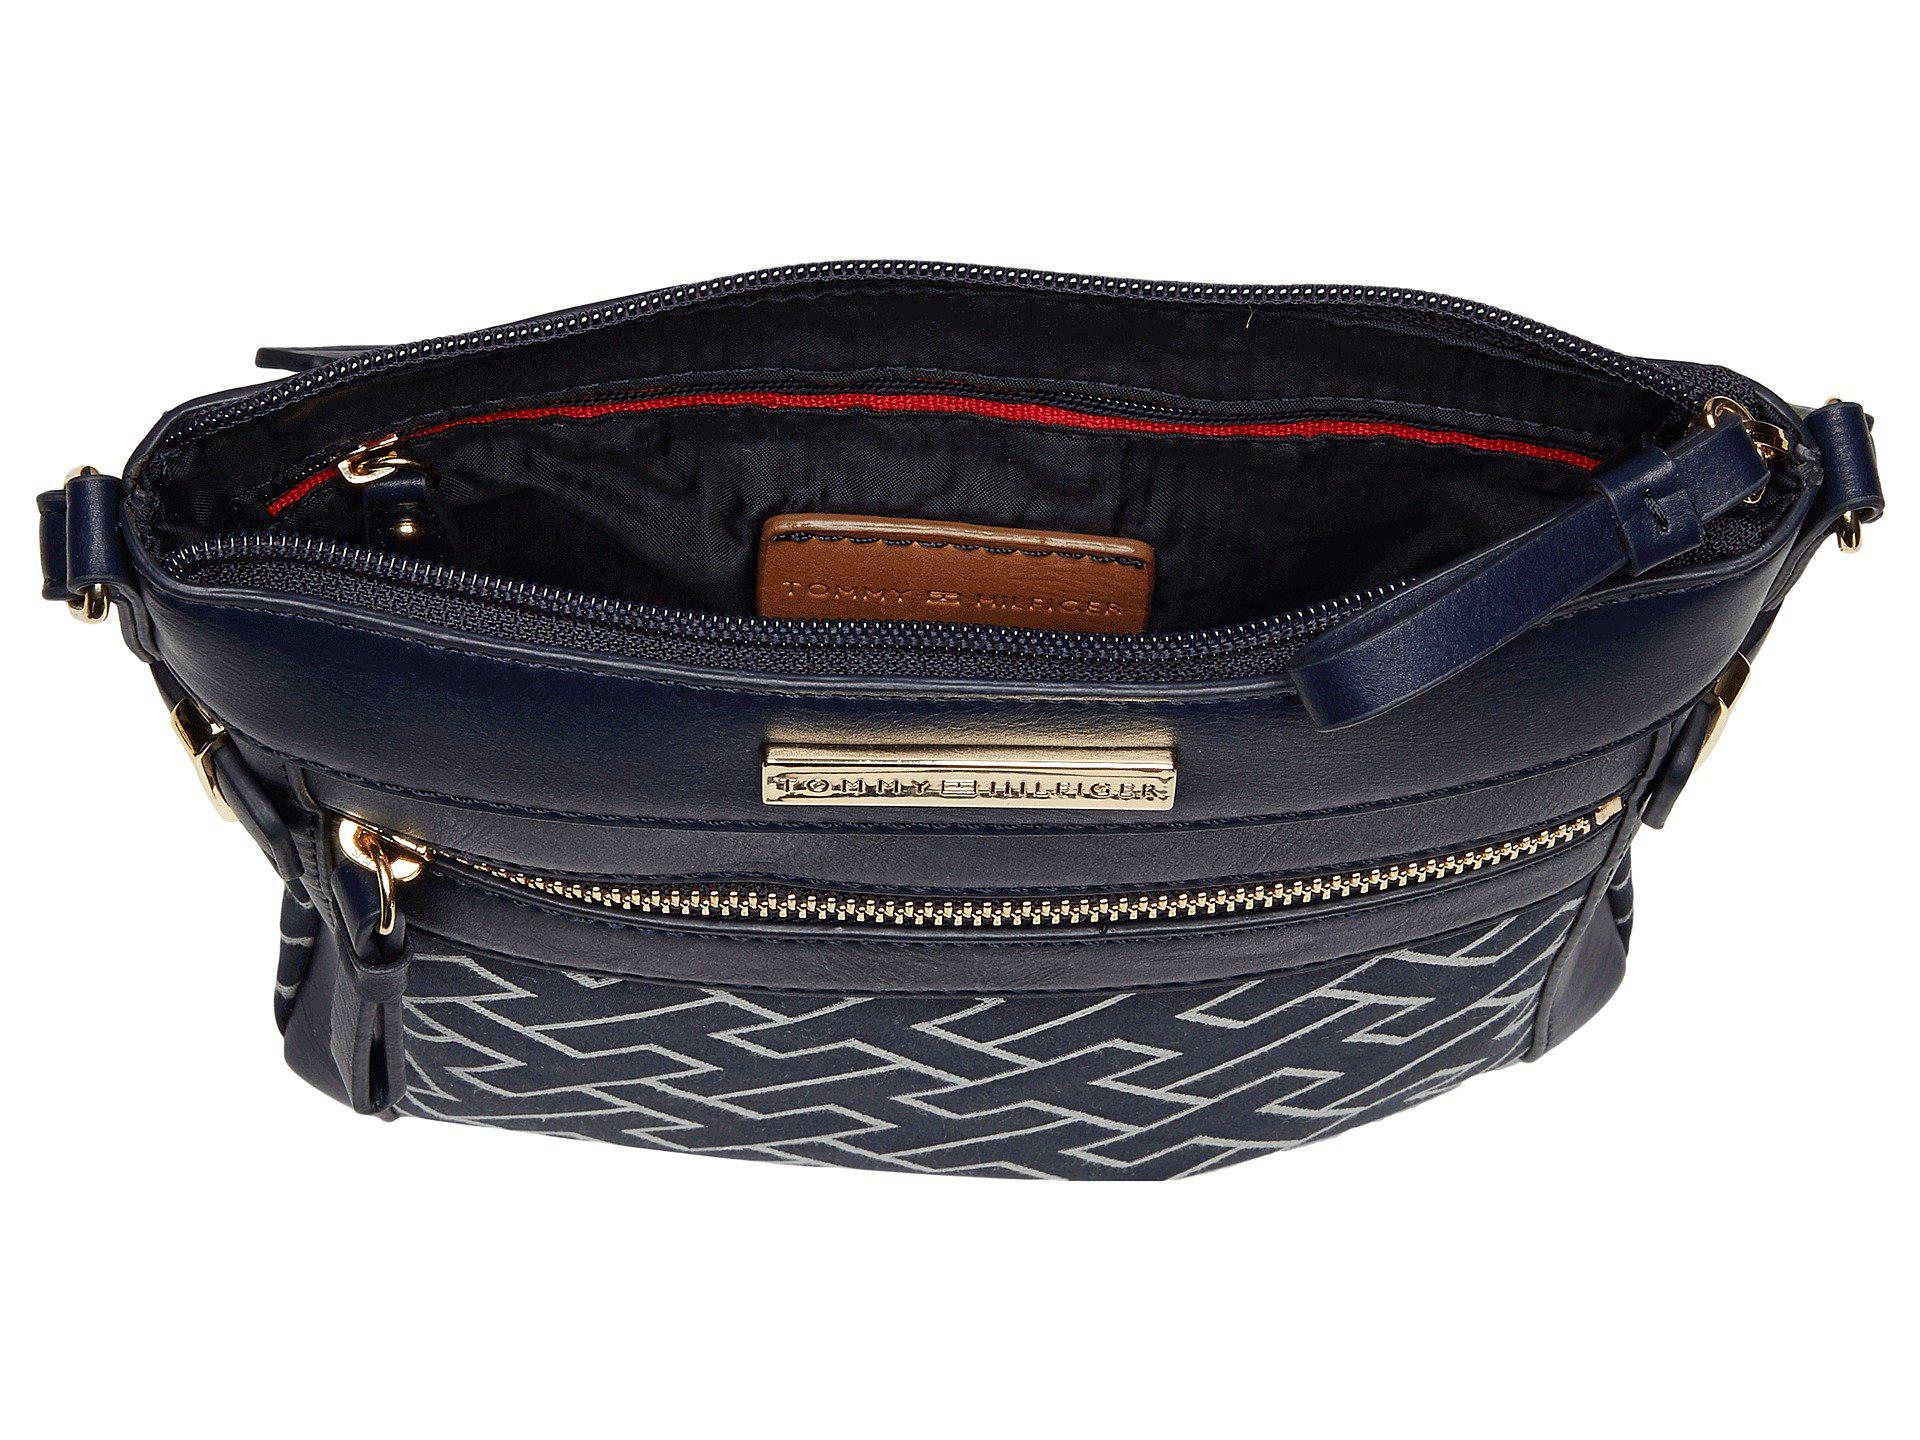 Tommy Hilfiger Claudia North/south Crossbody (navy/white) Cross Body Handbags in Blue - Lyst